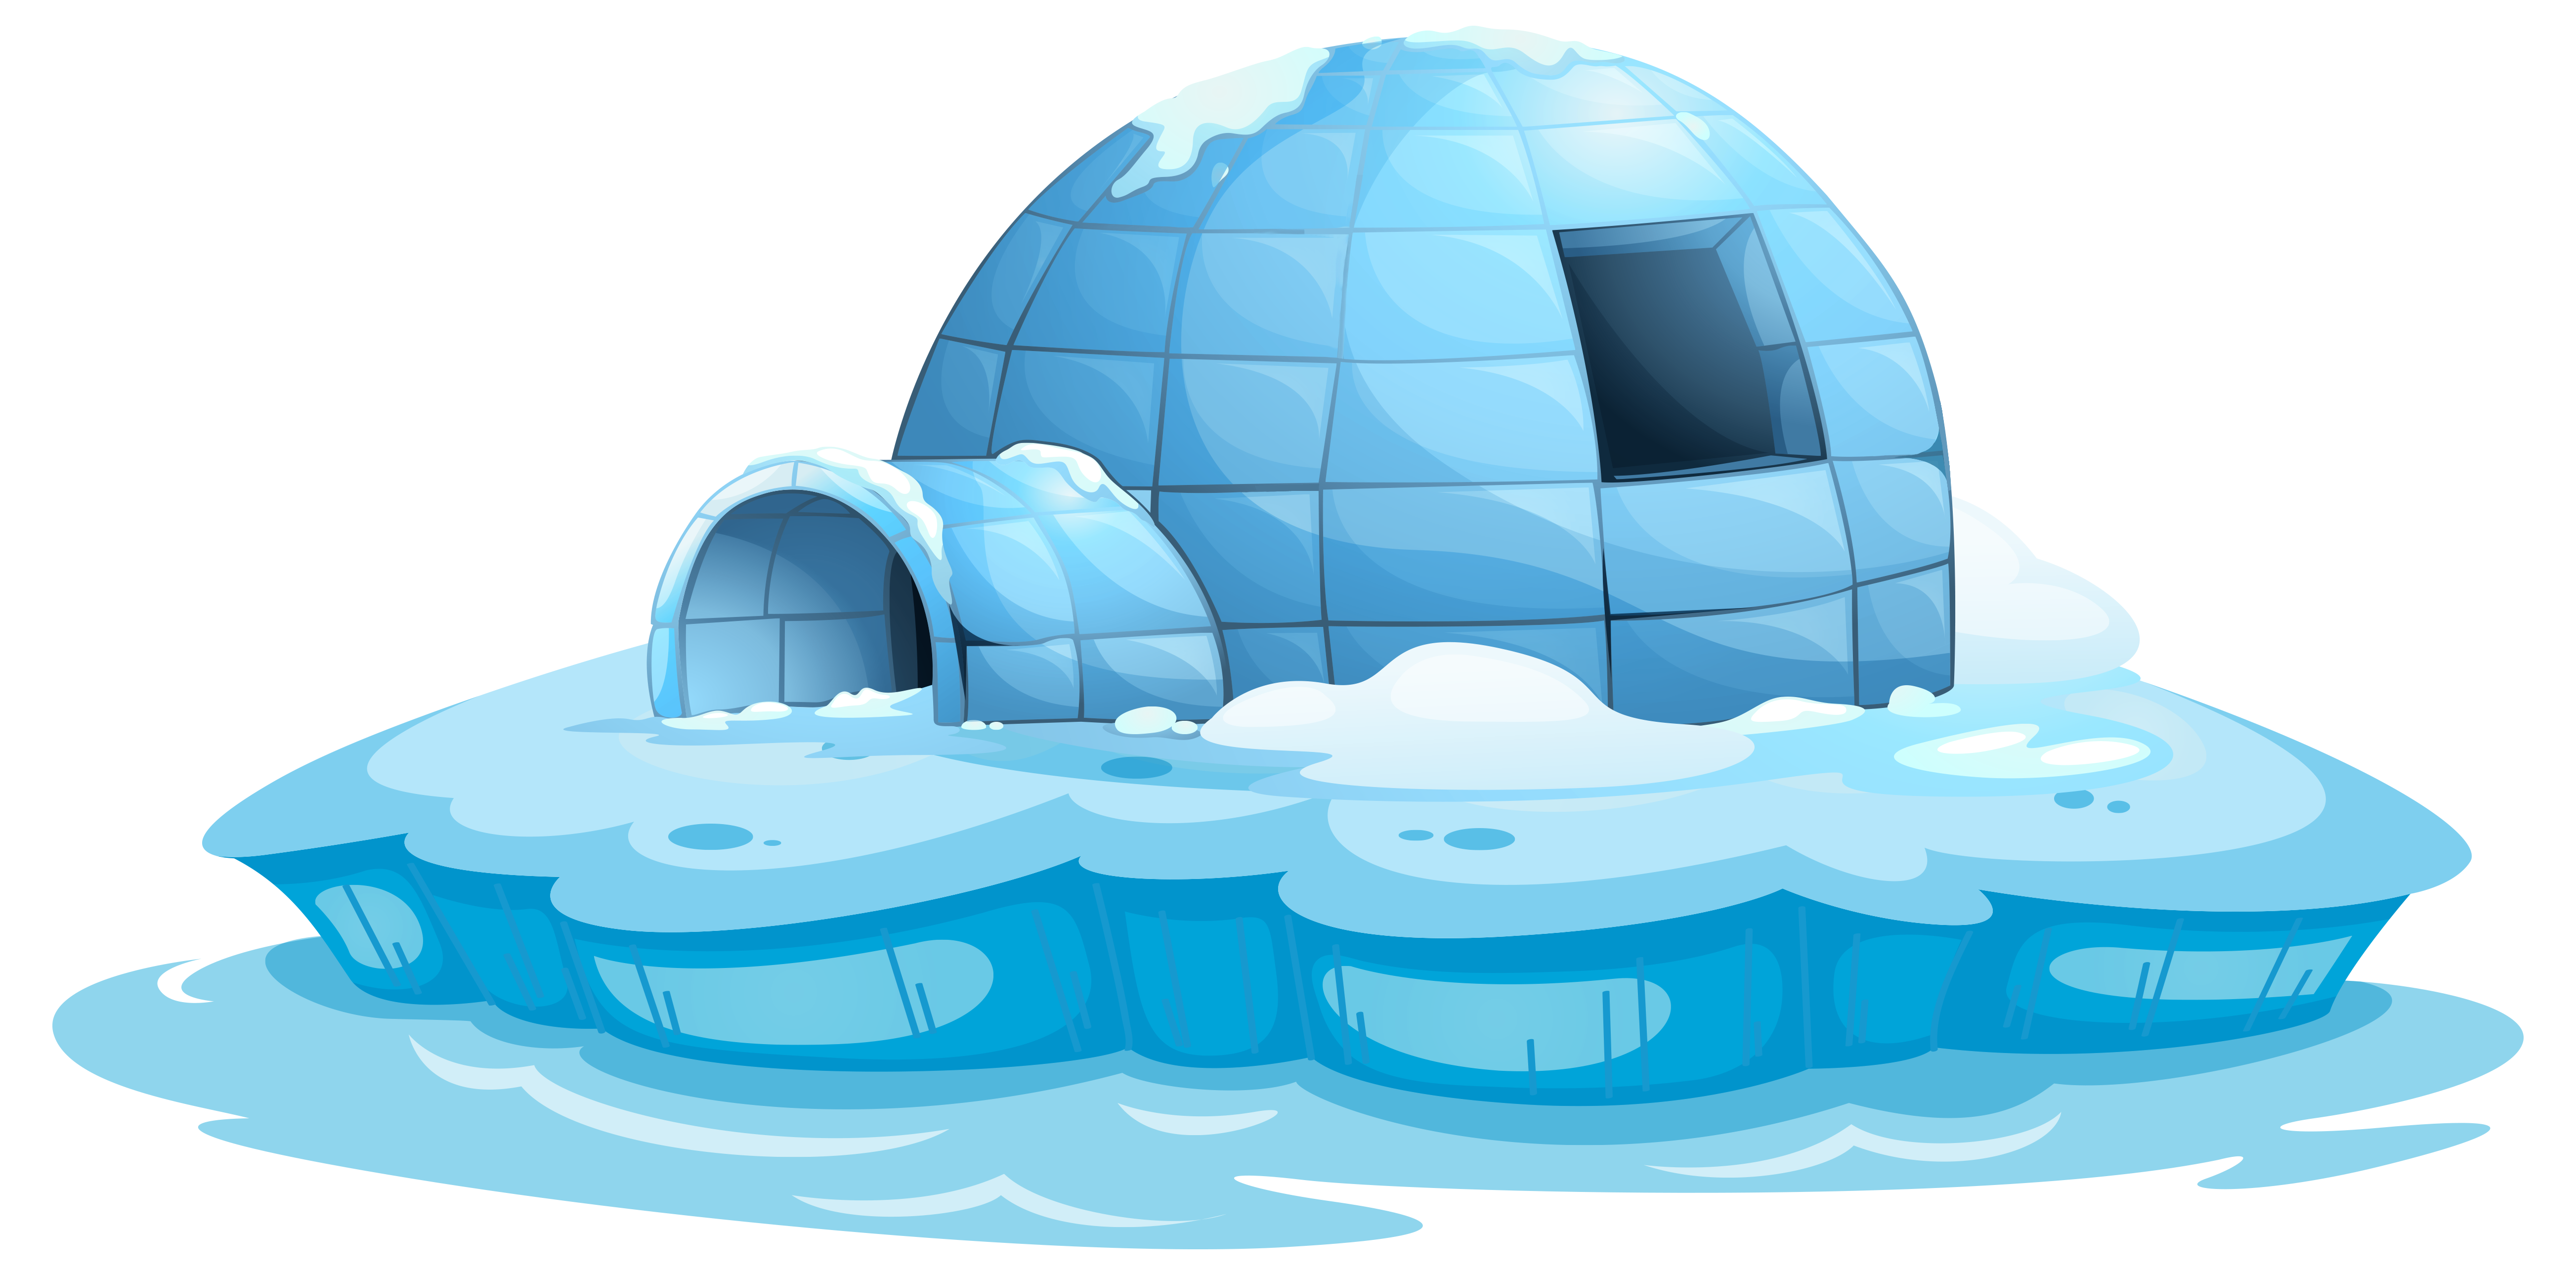 Clip Arts Related To : black and white clip art igloo. view all Igloo C...